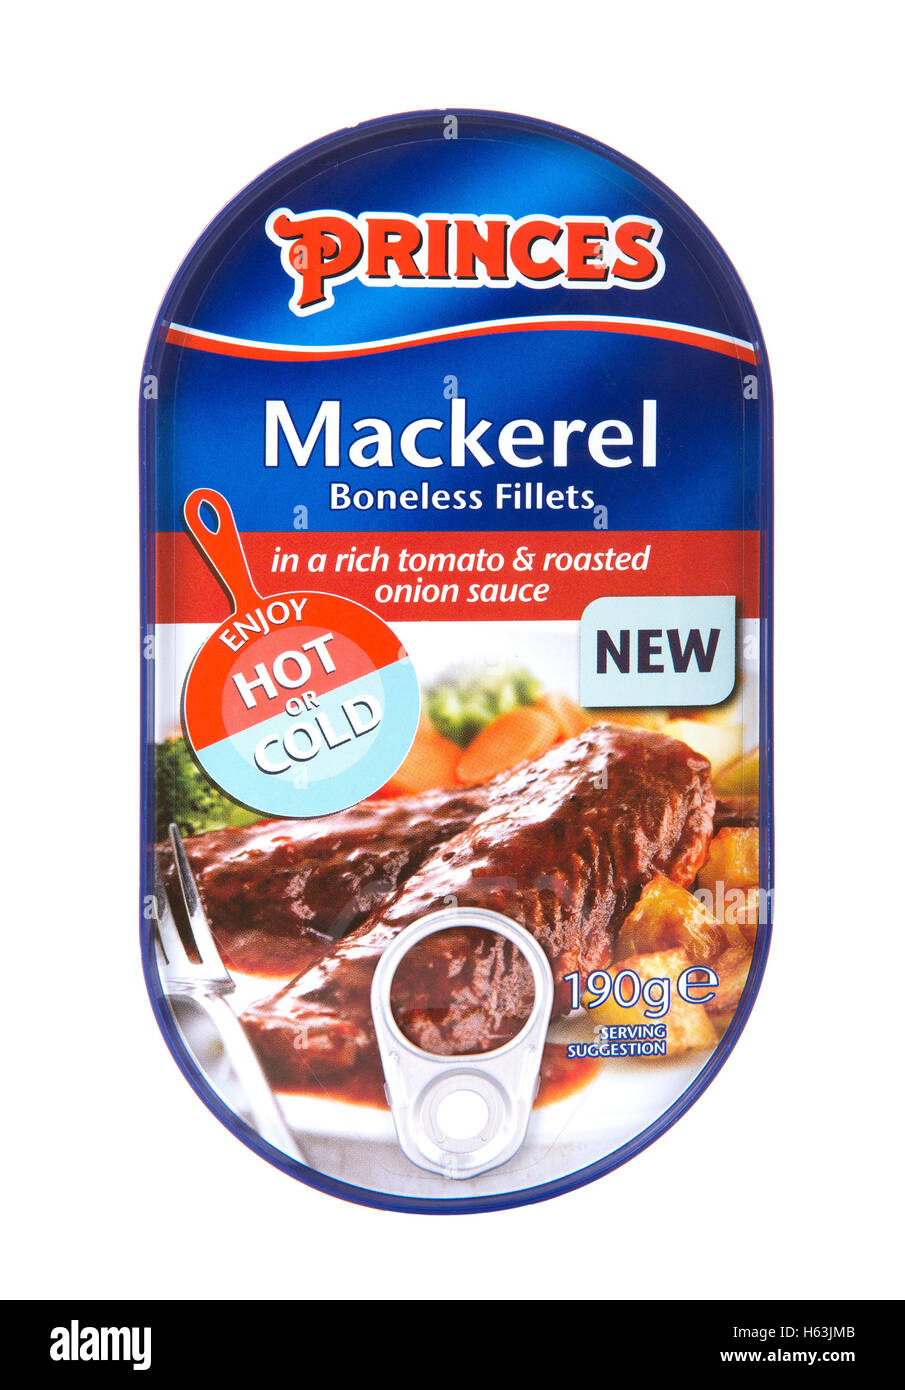 Tin of Princes Mackerel fillets in a rich Tomato and Roasted Onion Sauce on a white background Stock Photo